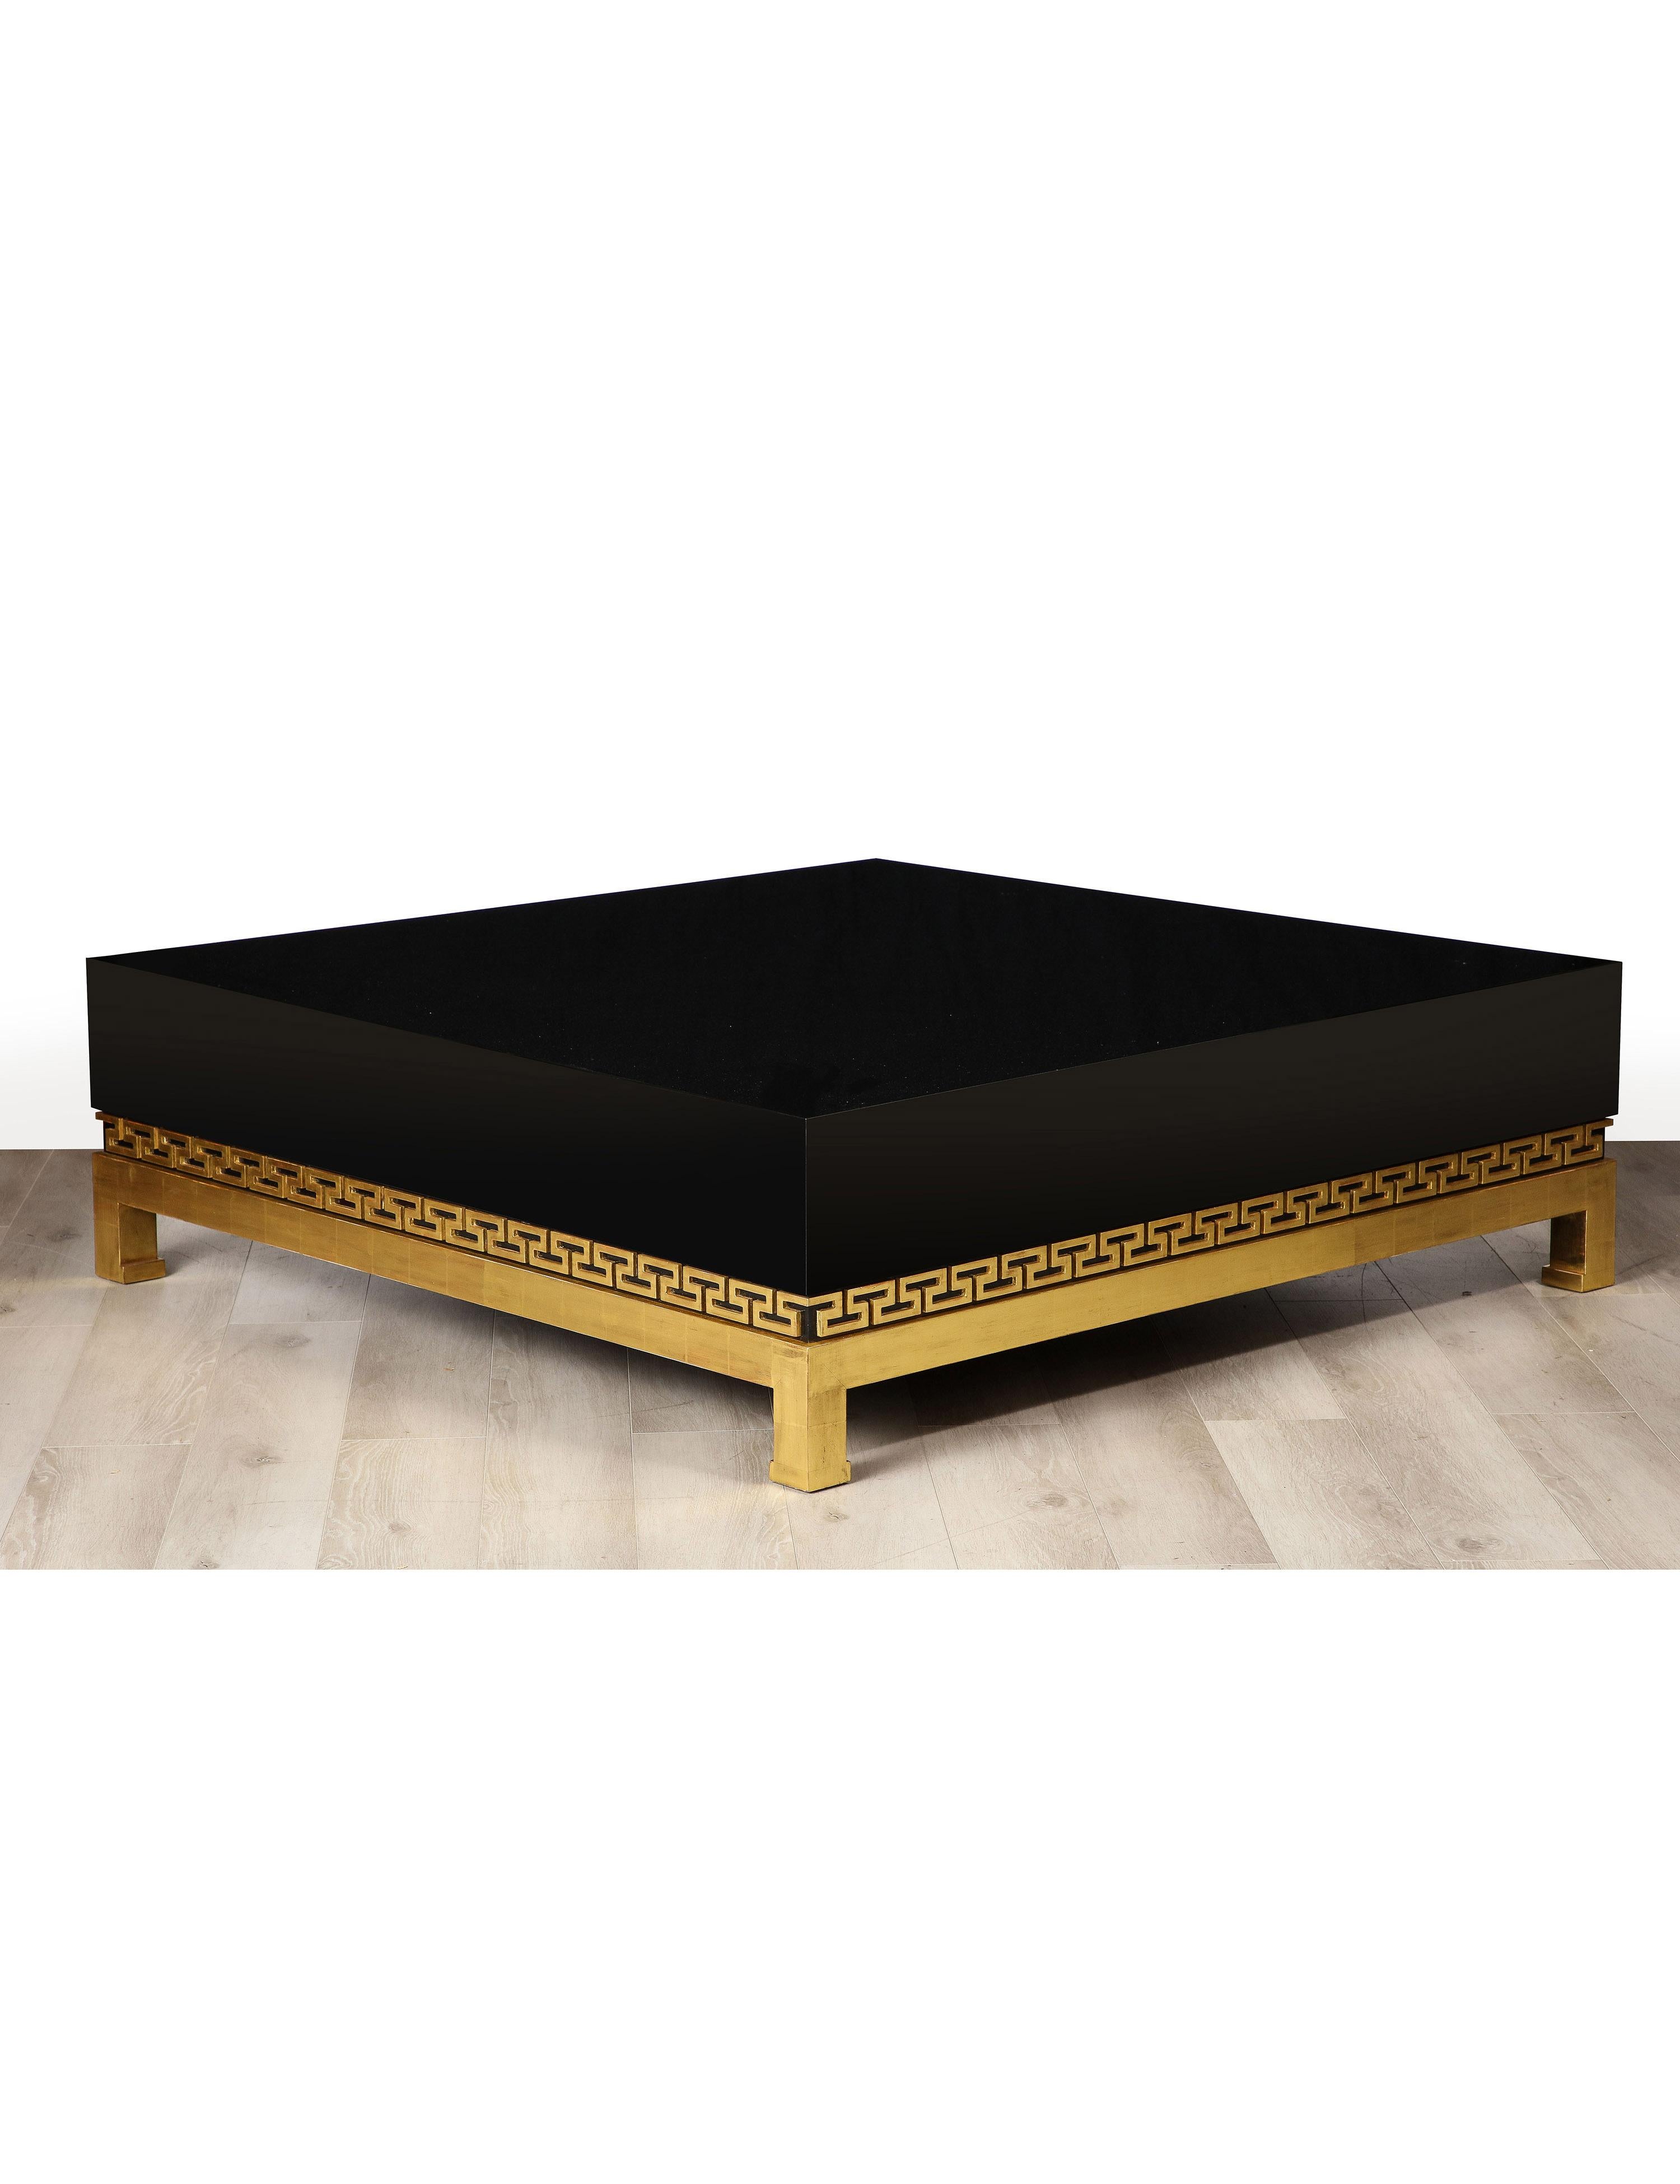 The grand scale neoclassic lacquered and giltwood coffee table with a polished black lacquer top over giltwood greek key detailing on a giltwood base